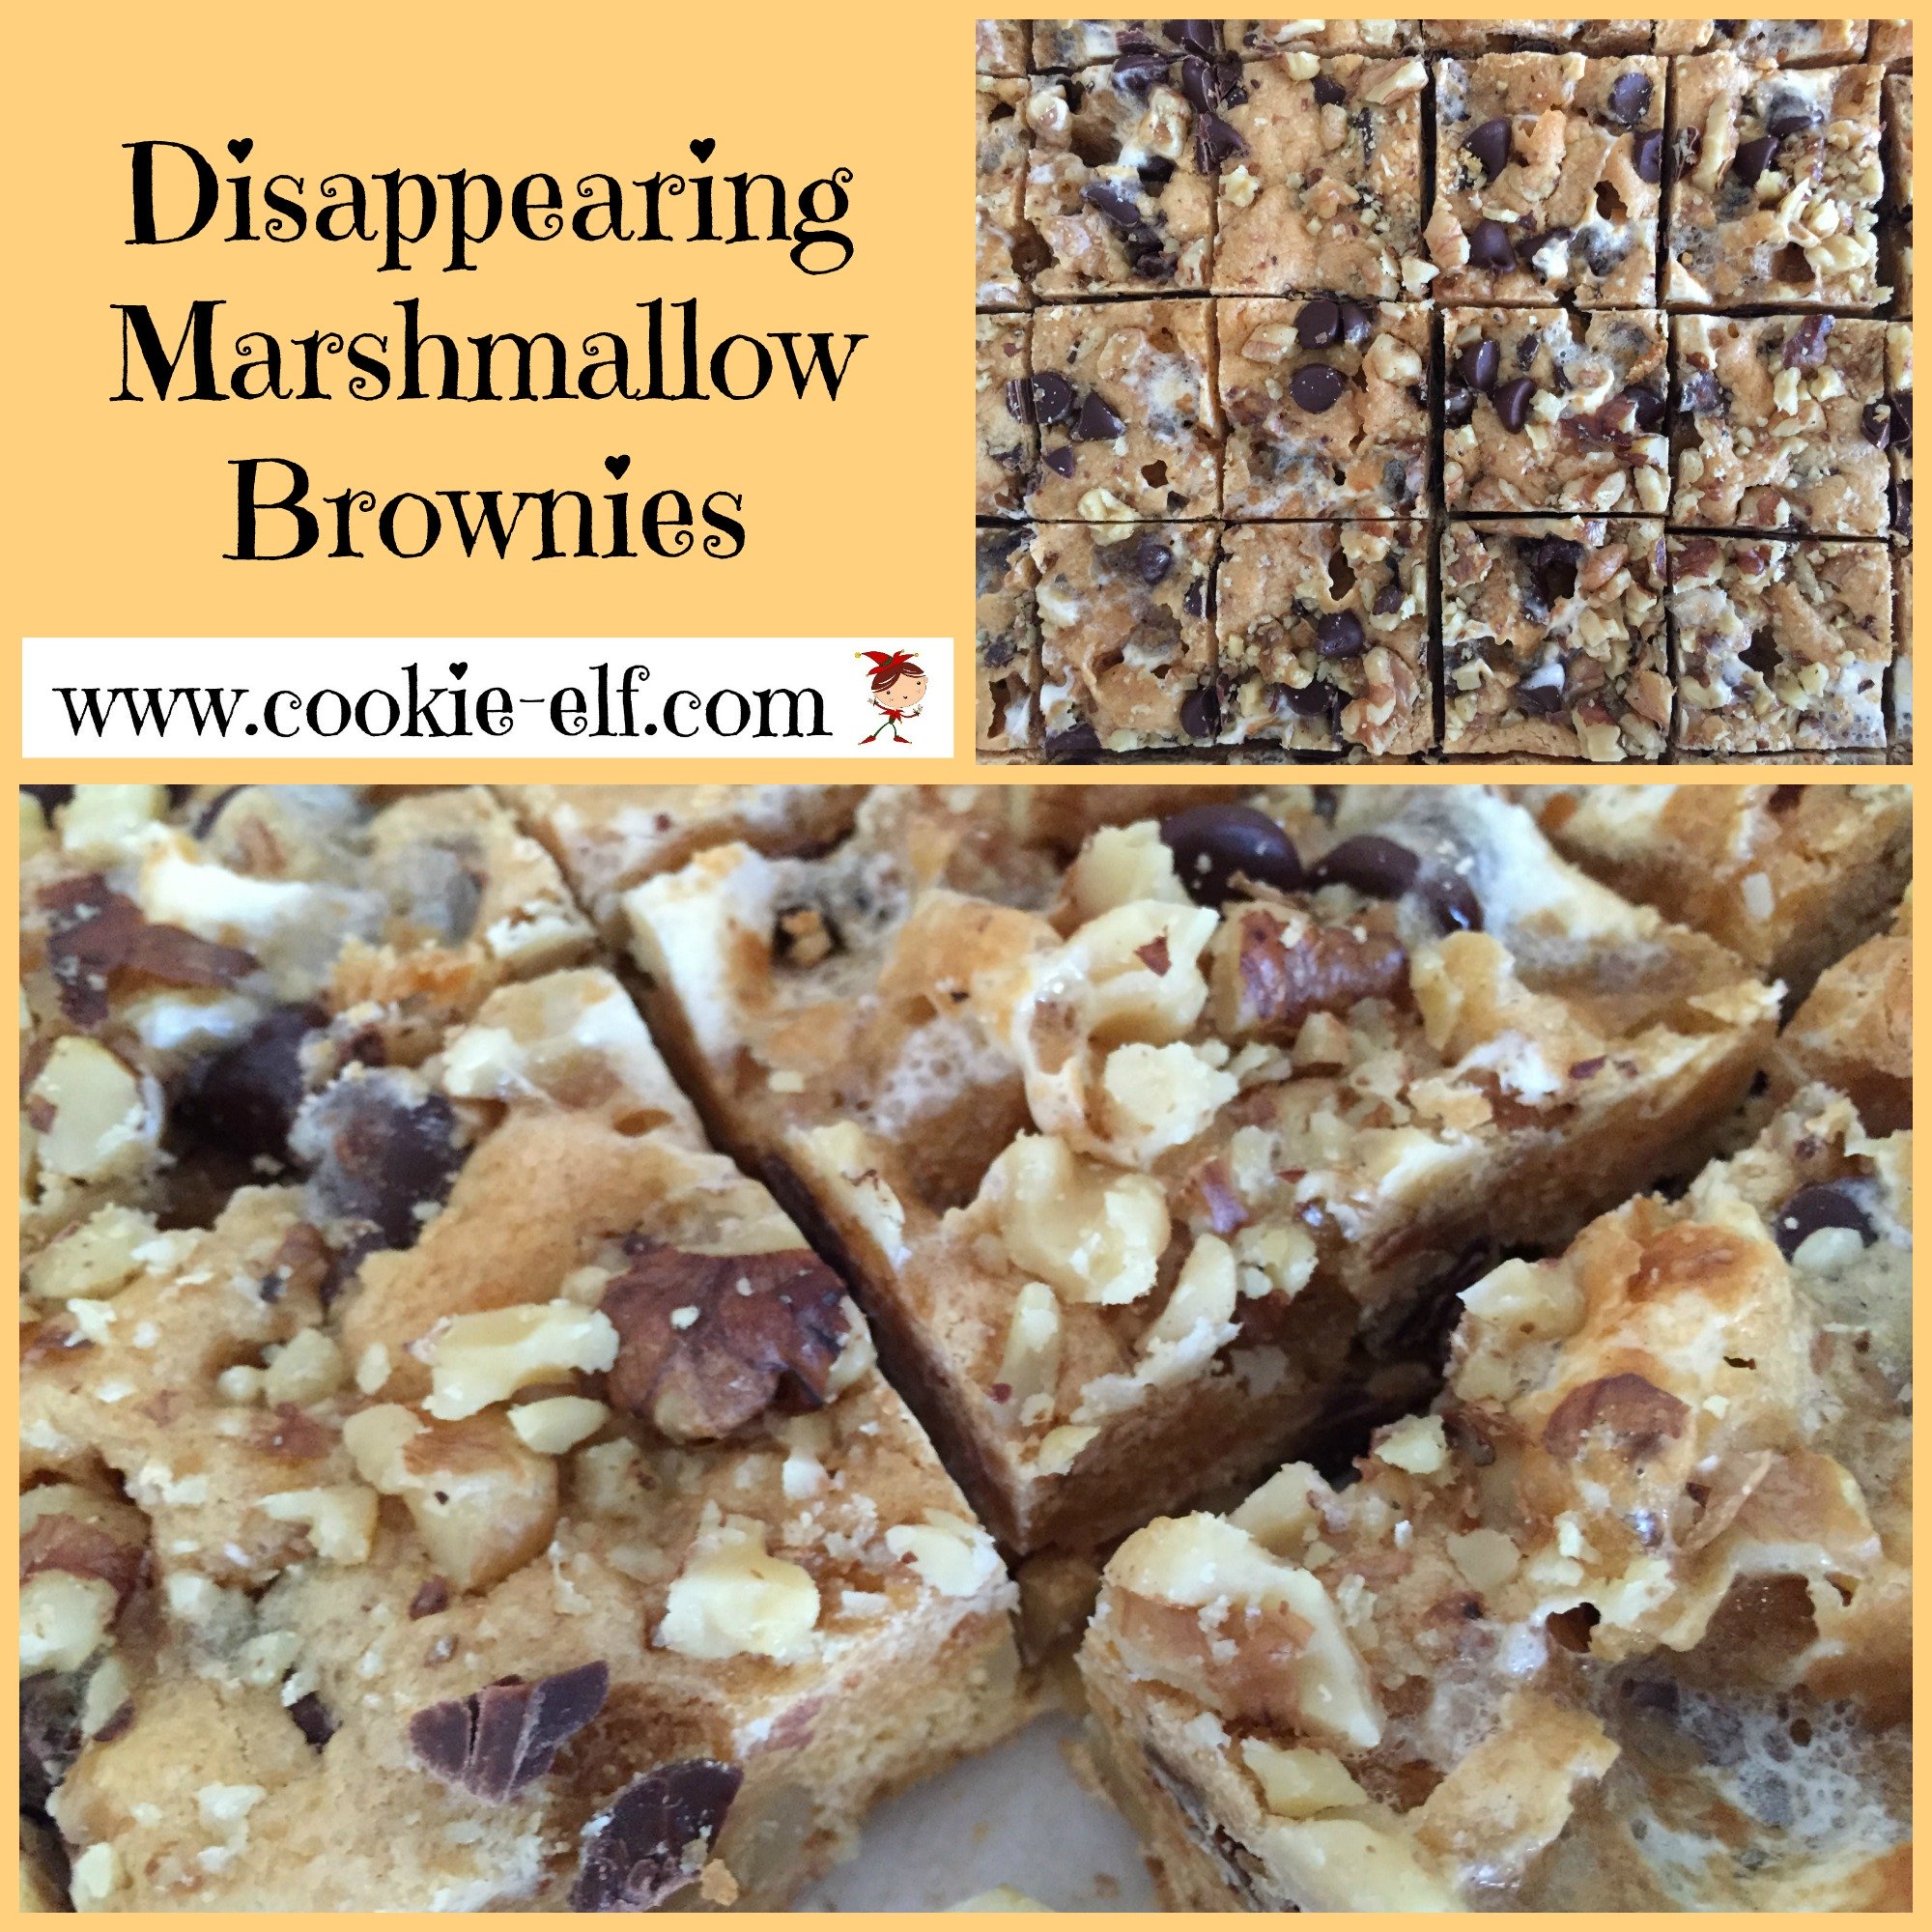 Disappearing Marshmallow Brownies from The Cookie Elf